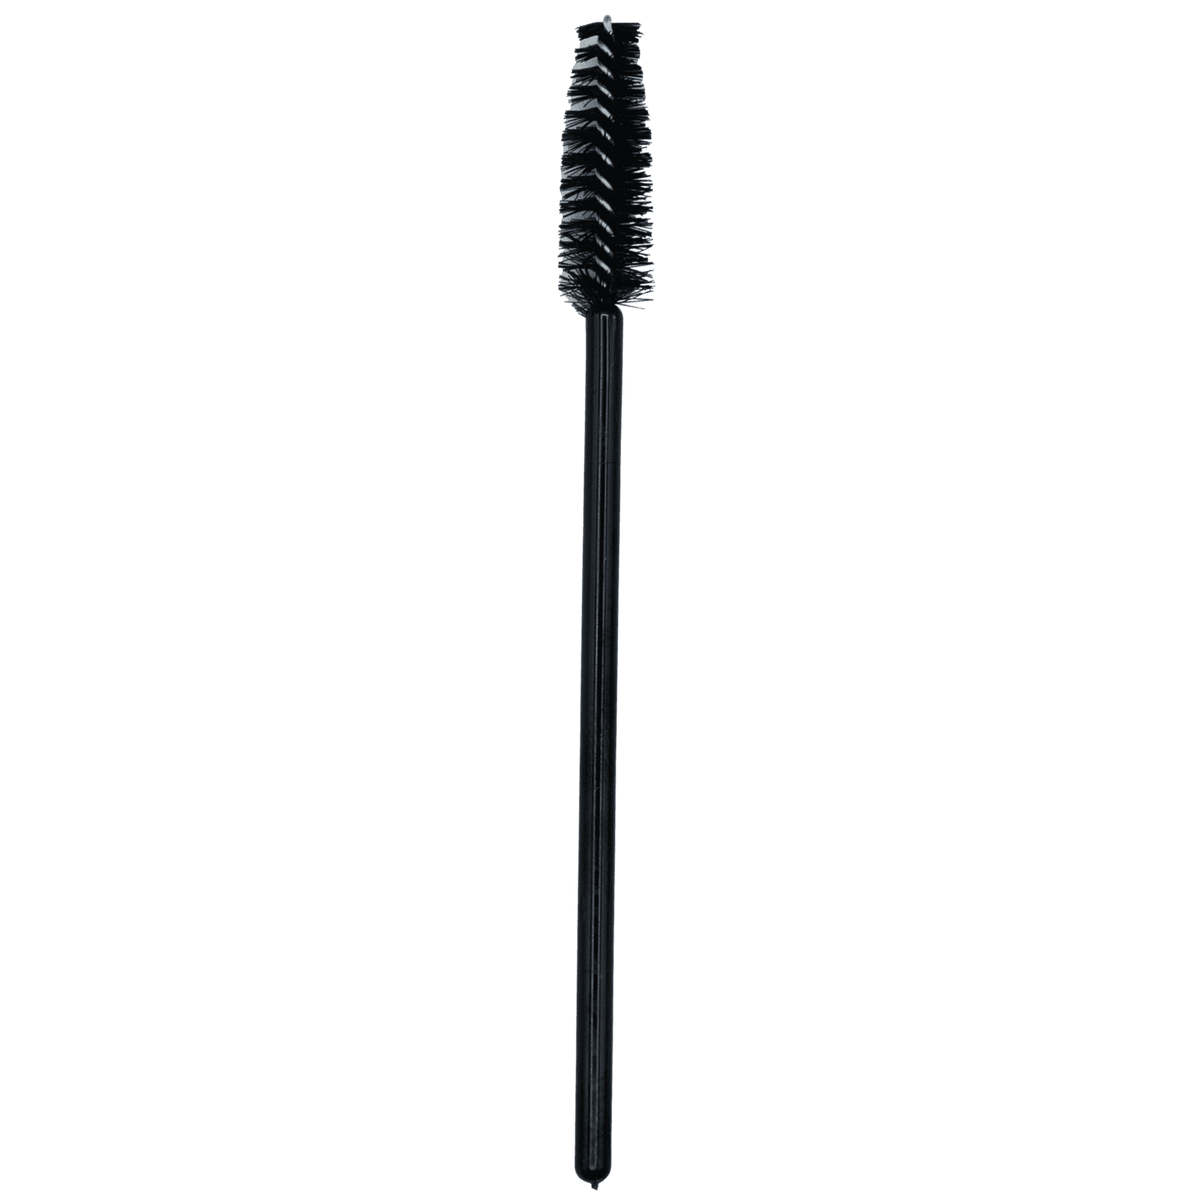 DISPOSABLE EYELASH AND EYEBROW BRUSHES - 50 PIECES